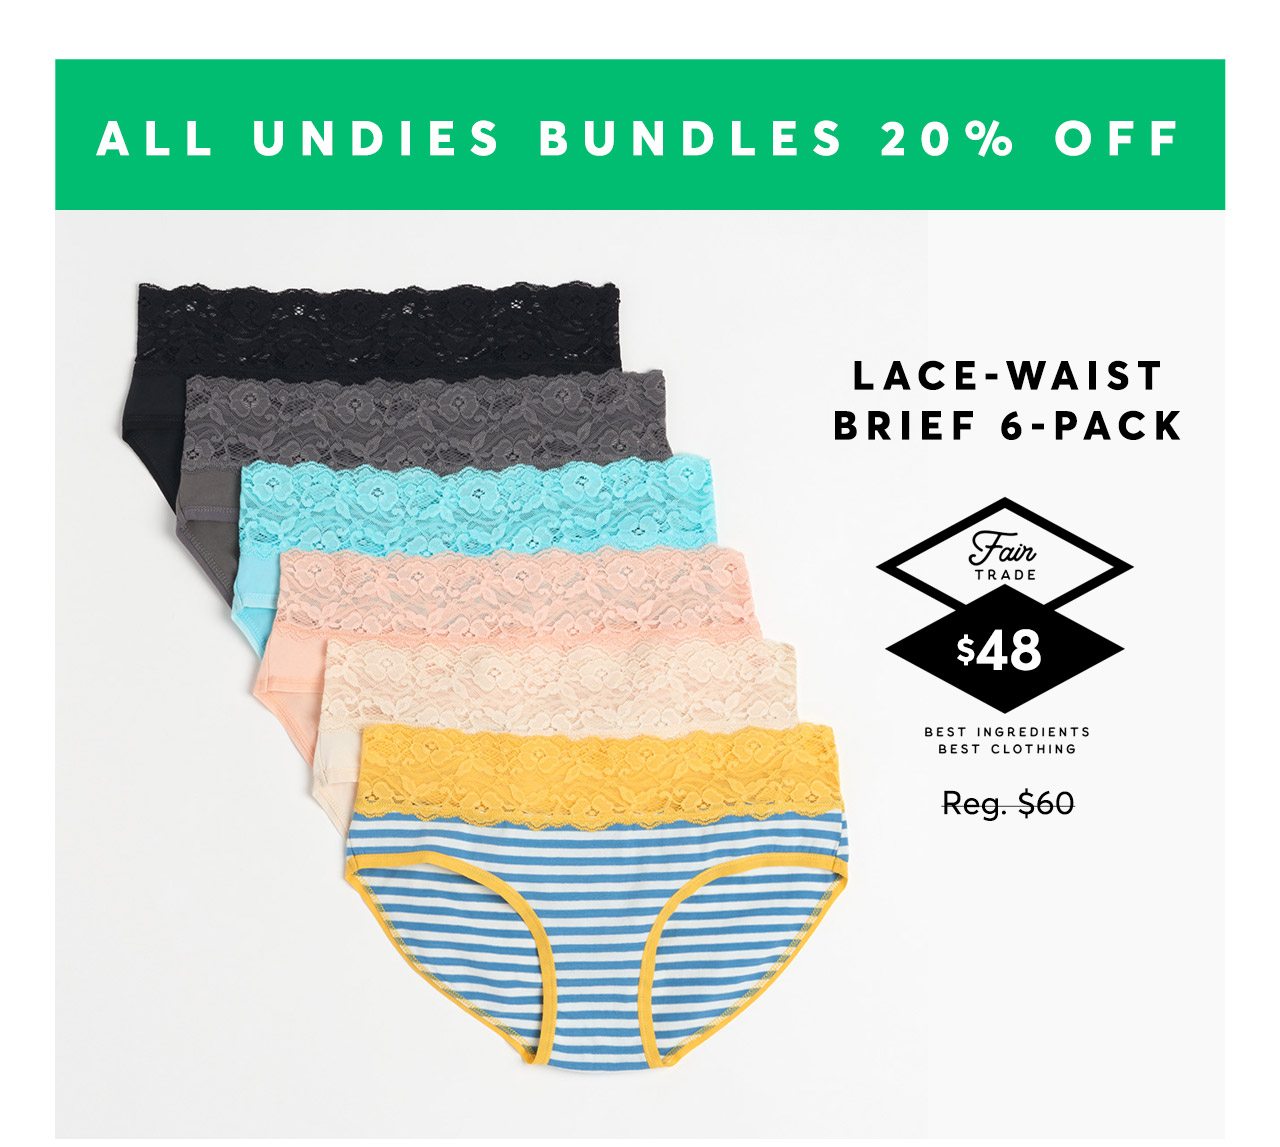 All socks and undies bundles are 20% off